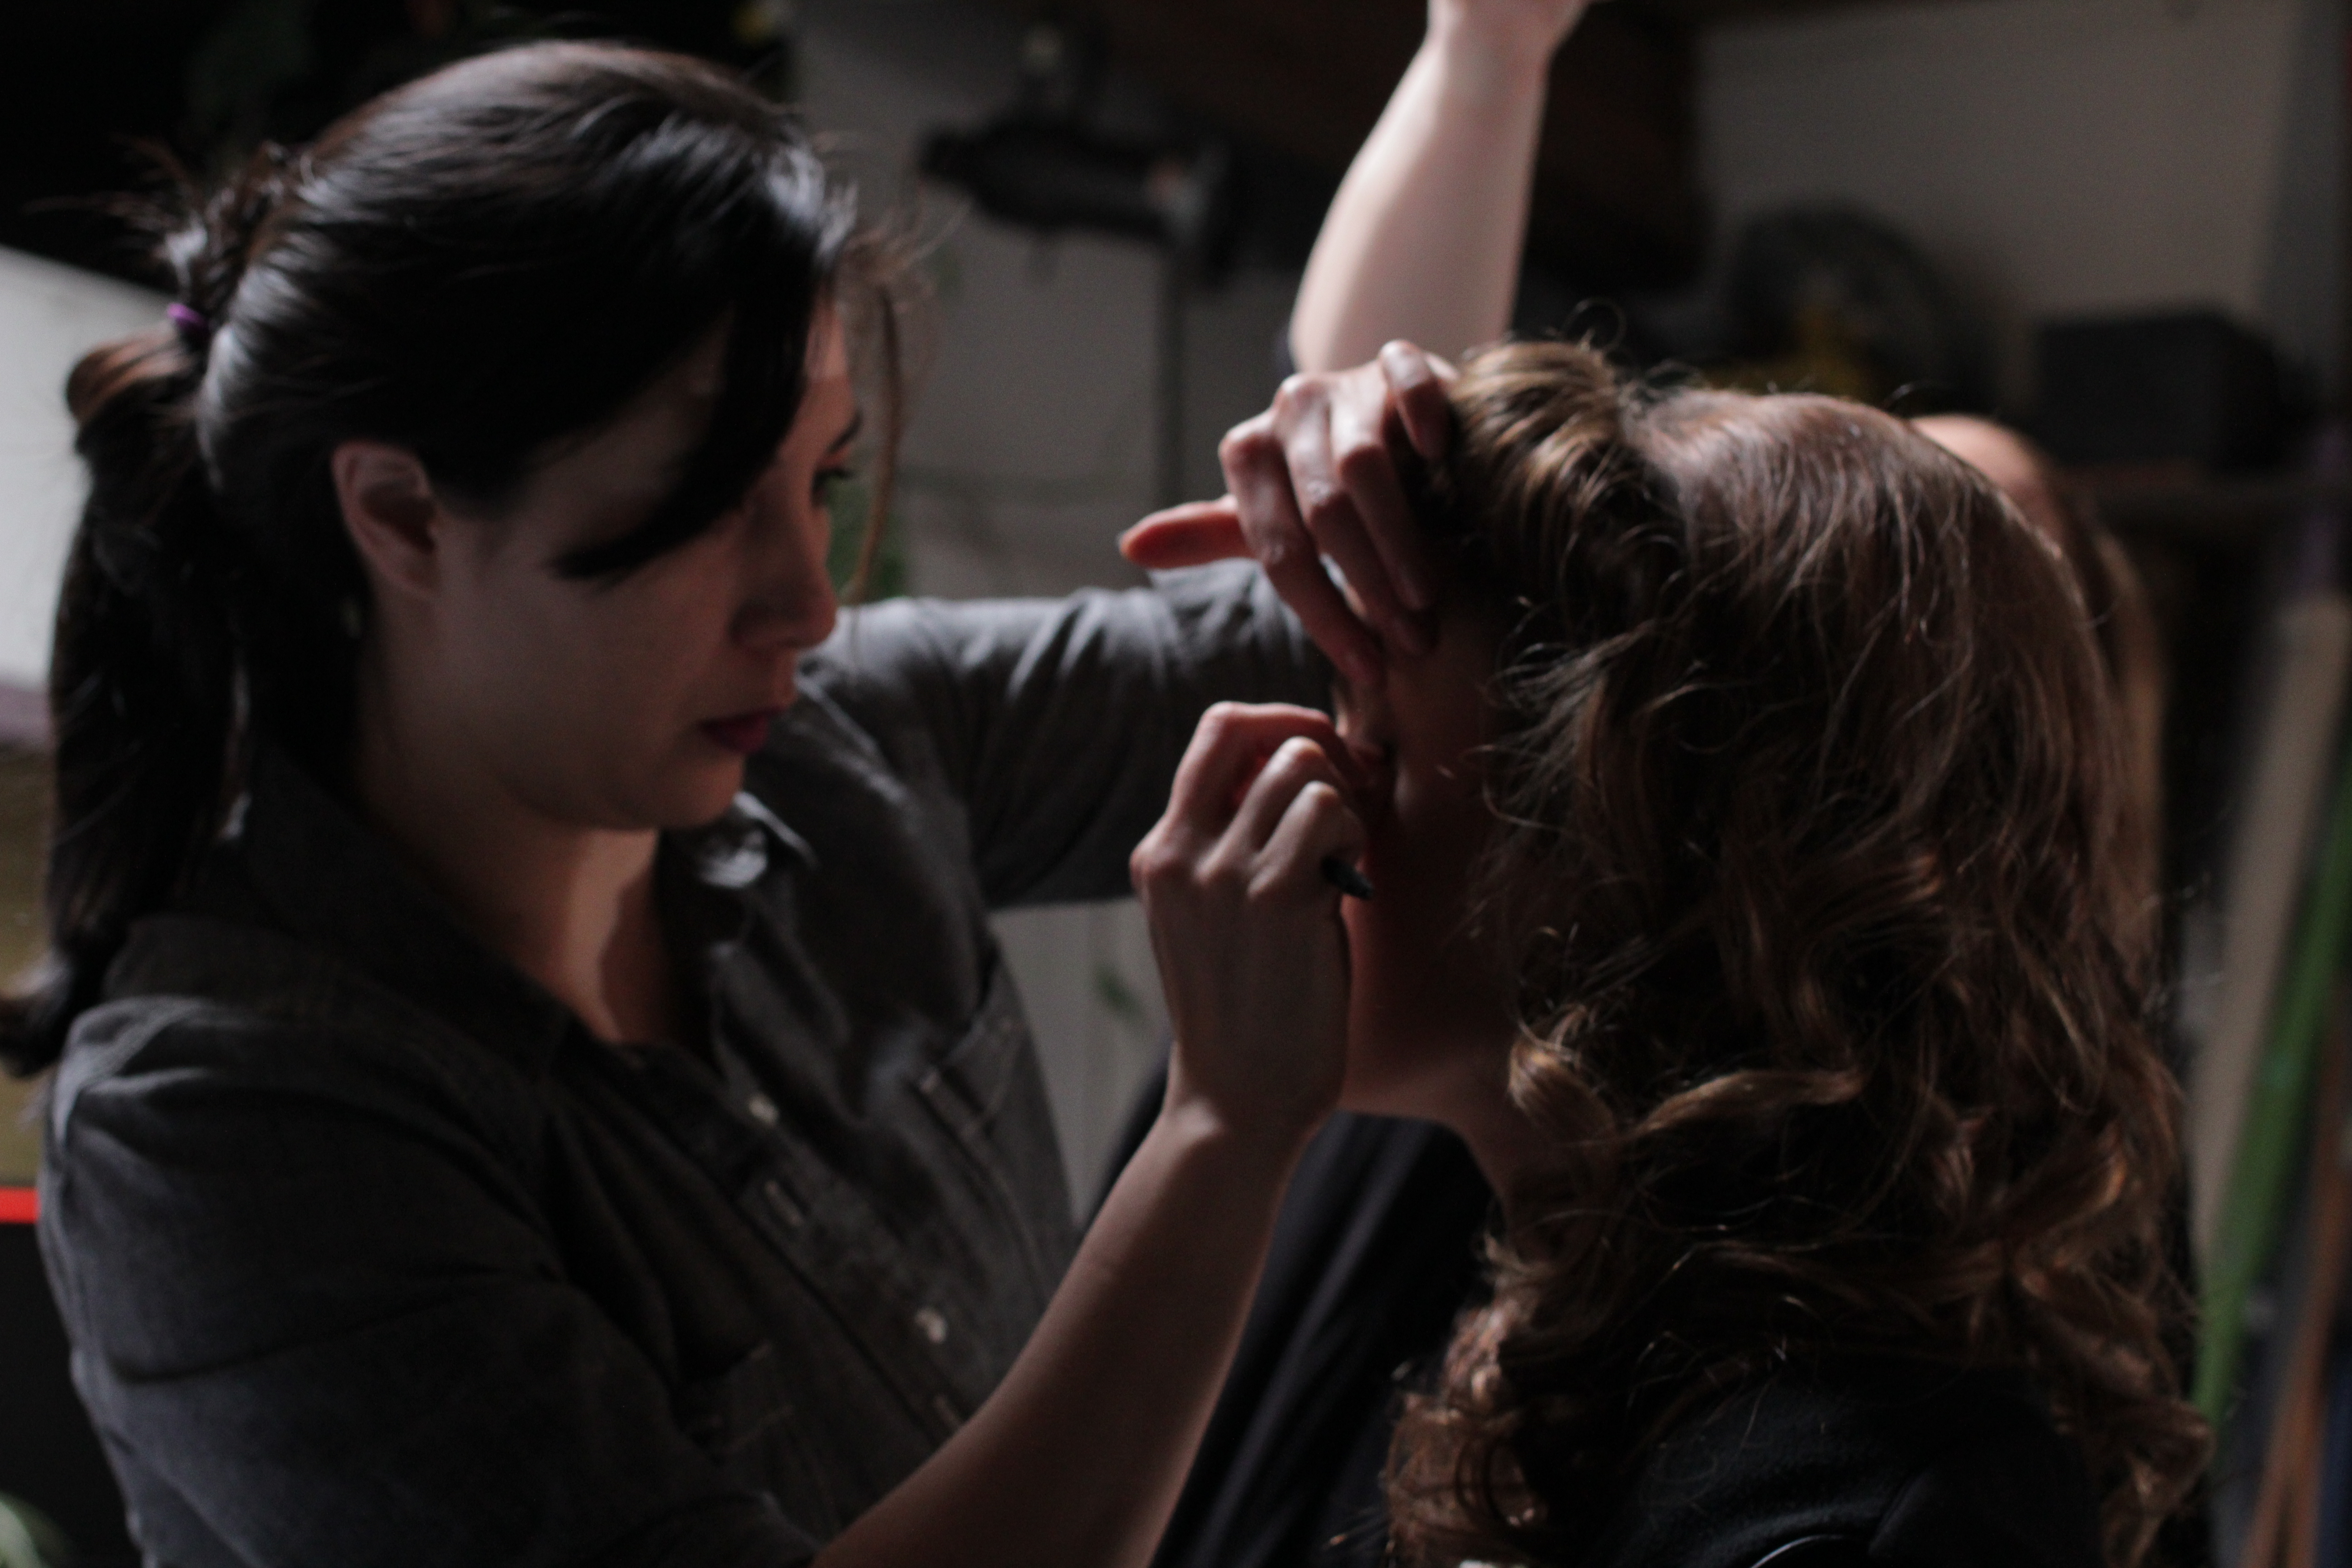 'Cole Phoenix' and make-up artist 'Amber Crombach' getting ready for promotional photoshoot.